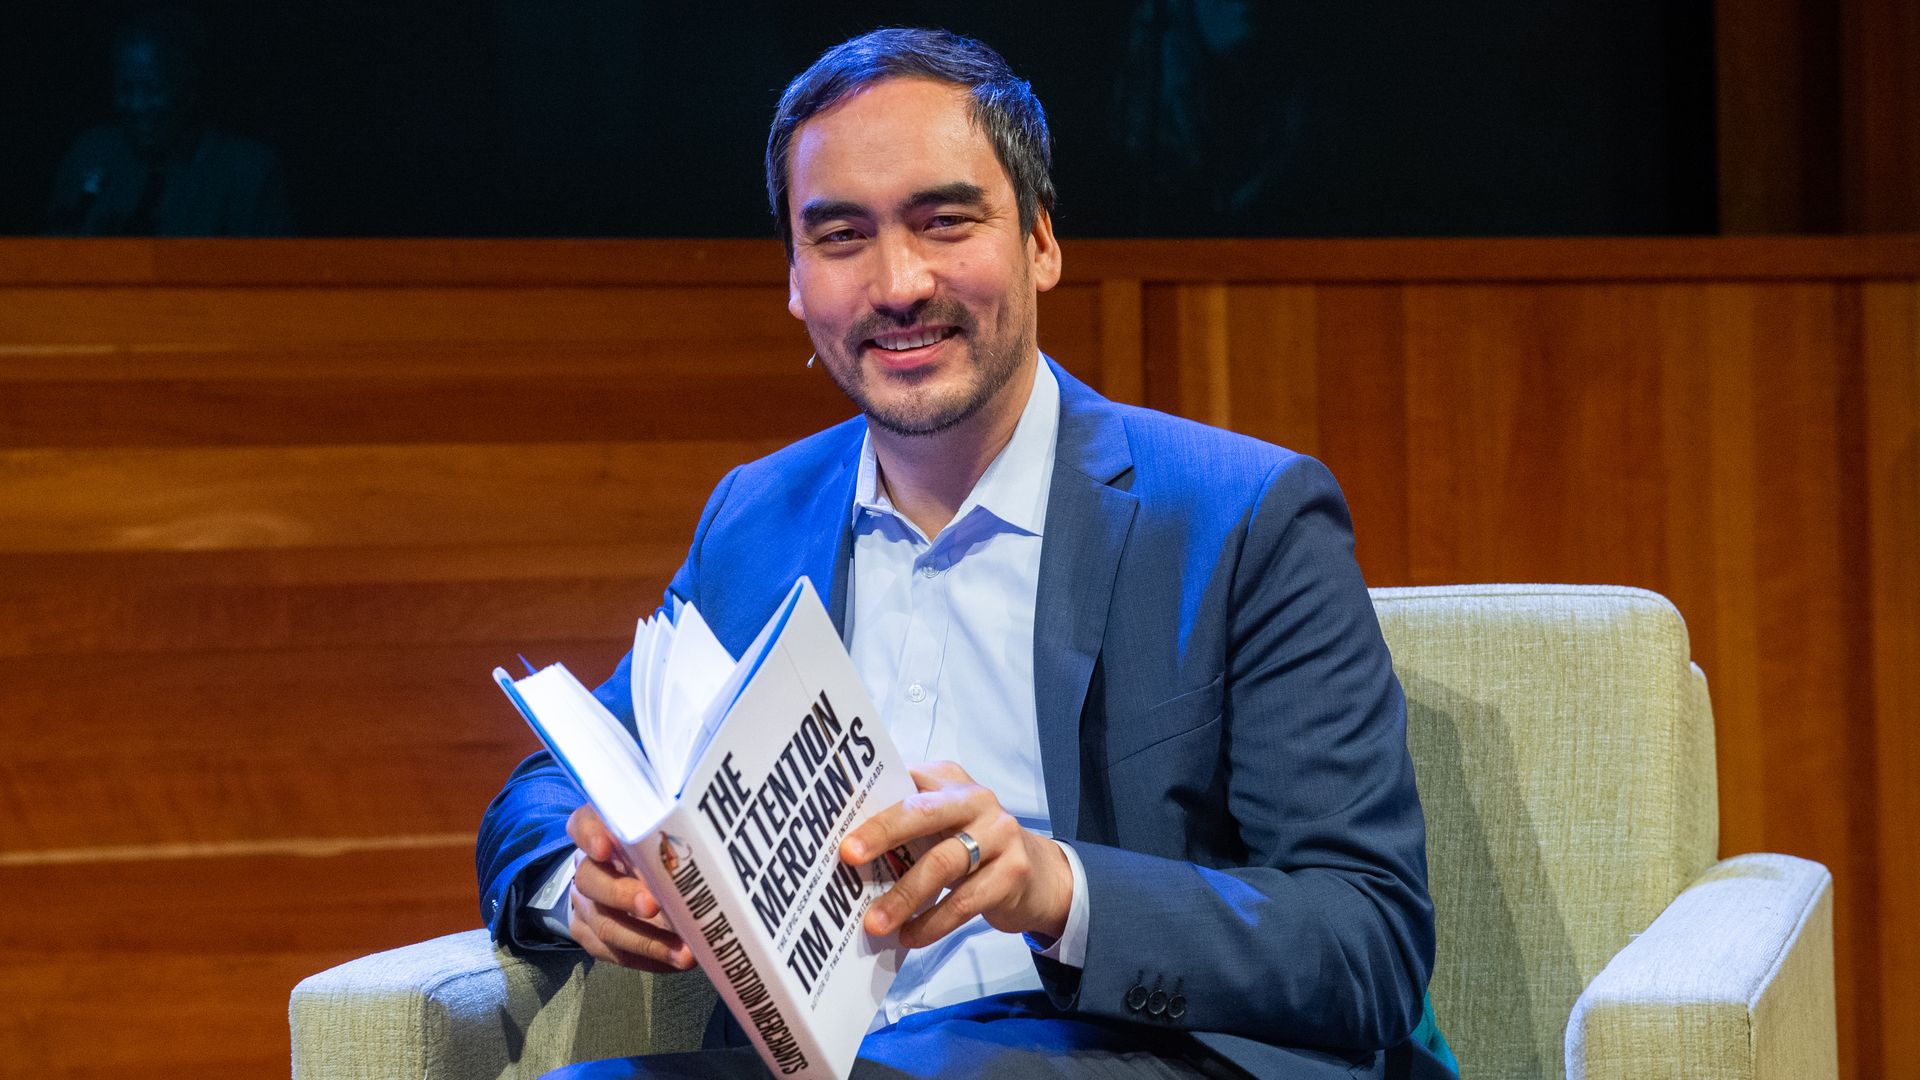 Departing White House antitrust official Tim Wu holding a book on stage